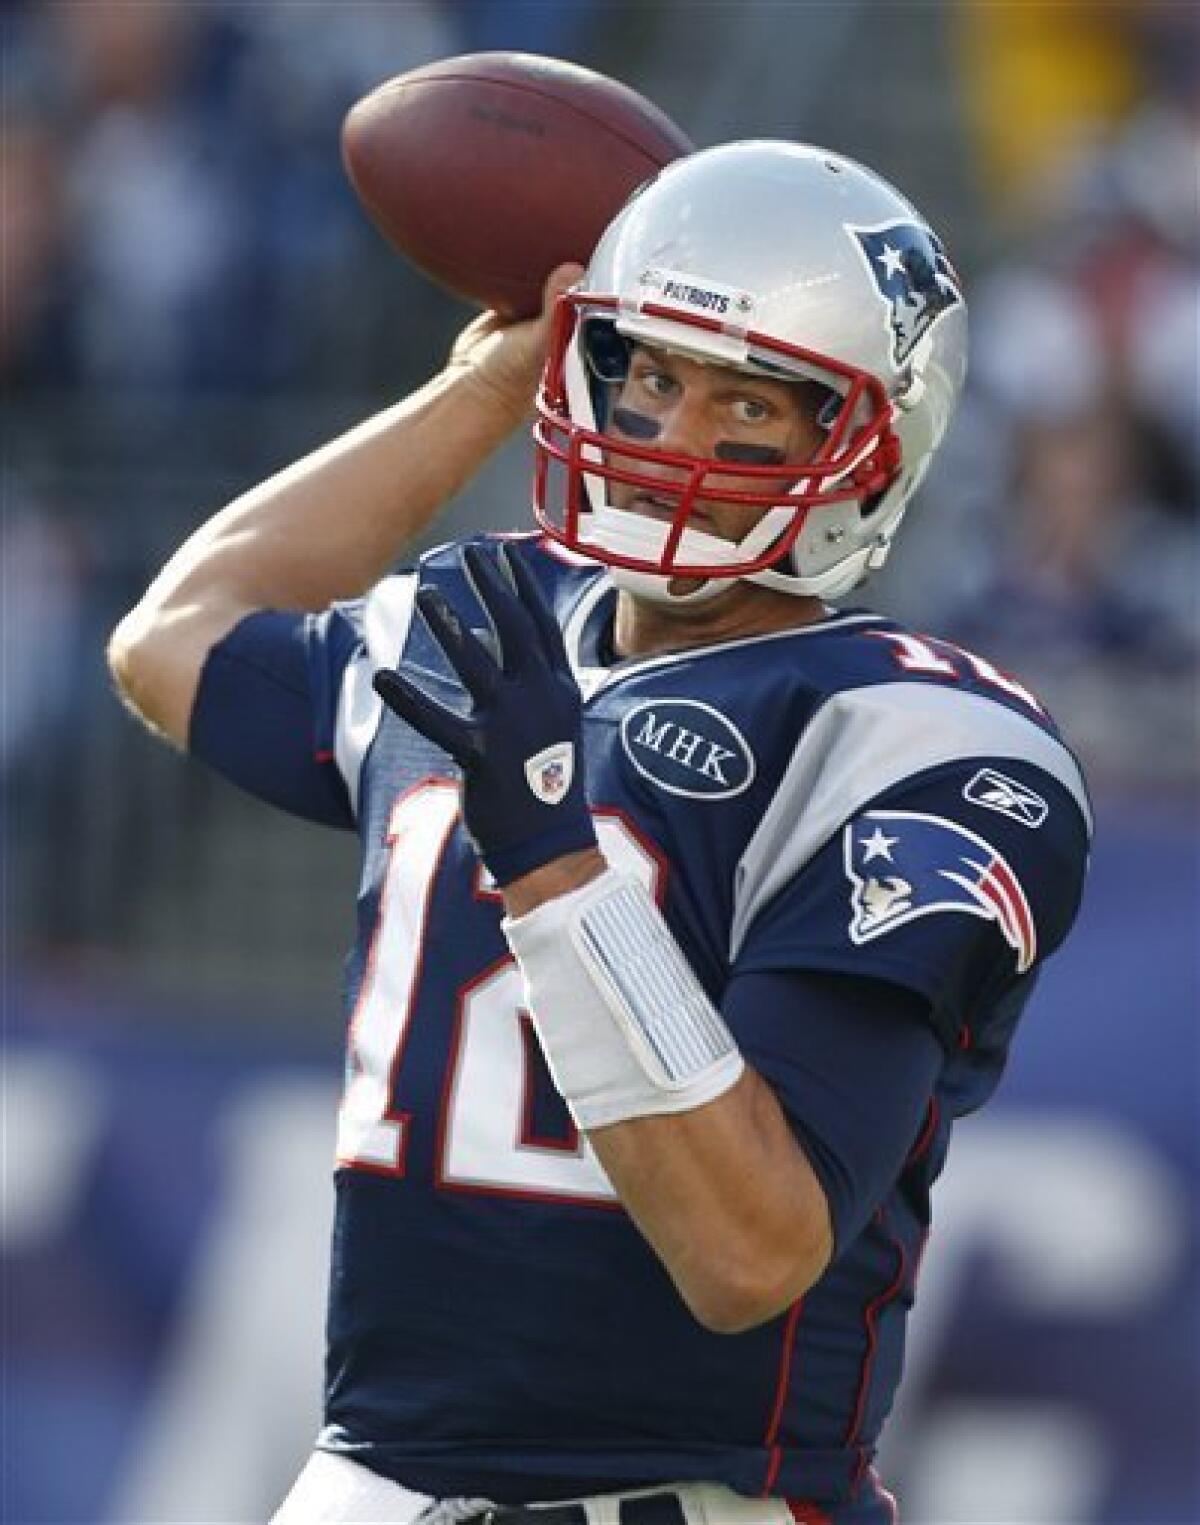 Tom Brady sets NFL career passing yards record against Patriots